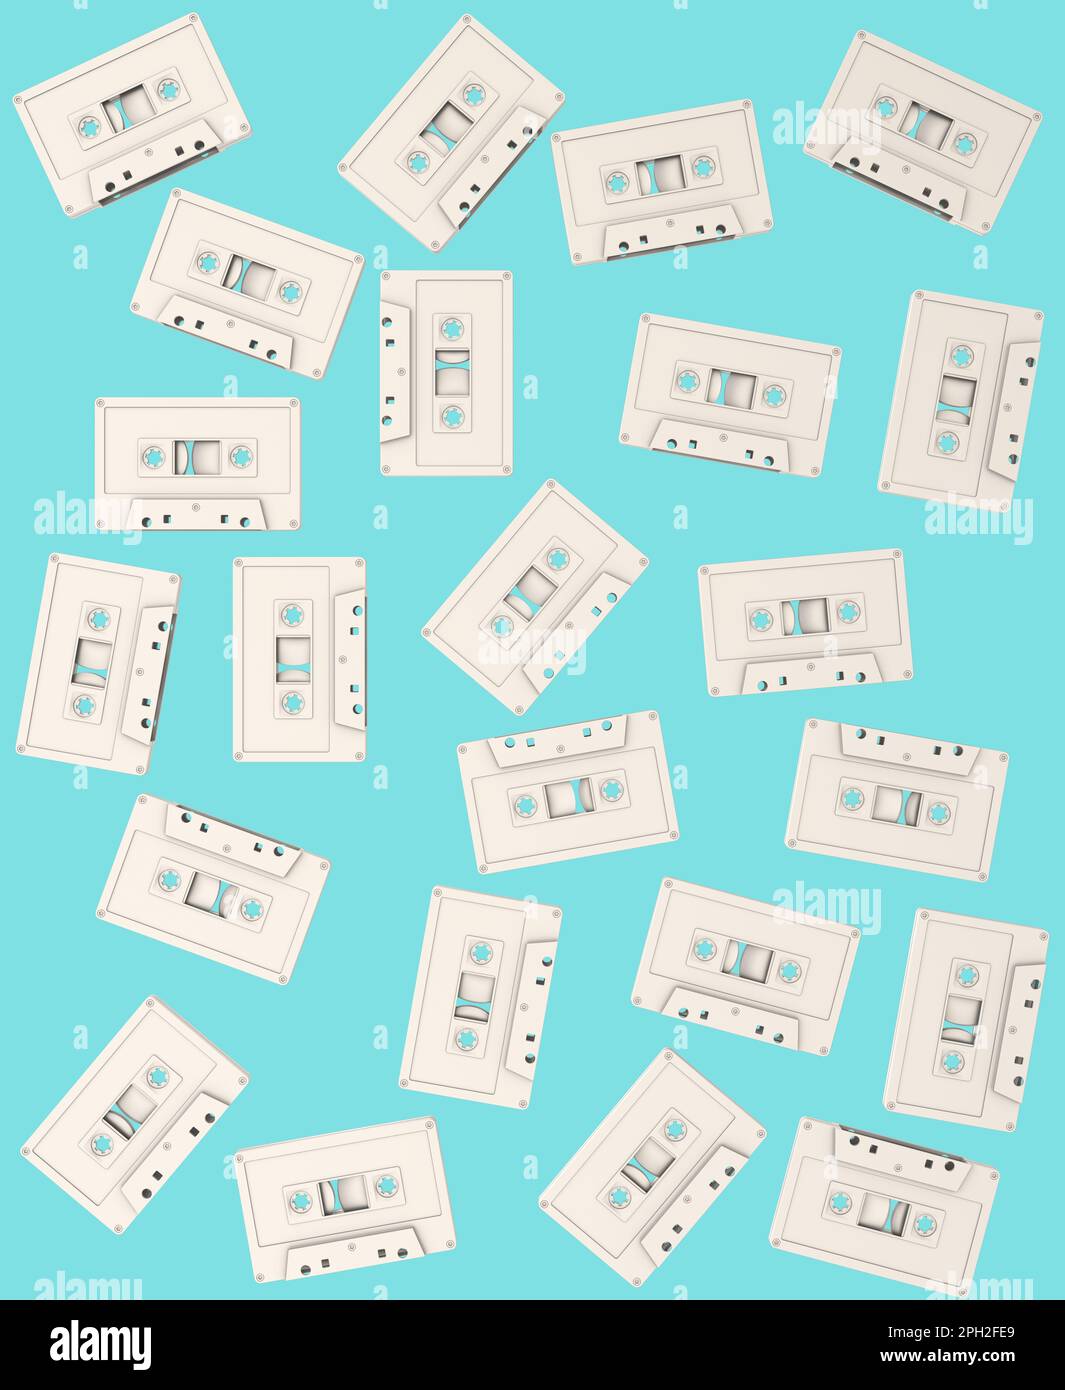 Abstract image of cassettes floating randomly in space. Retro minimalism from the 80s and 90s. Ideal for lovers of old school music, and enthusiasts o Stock Photo